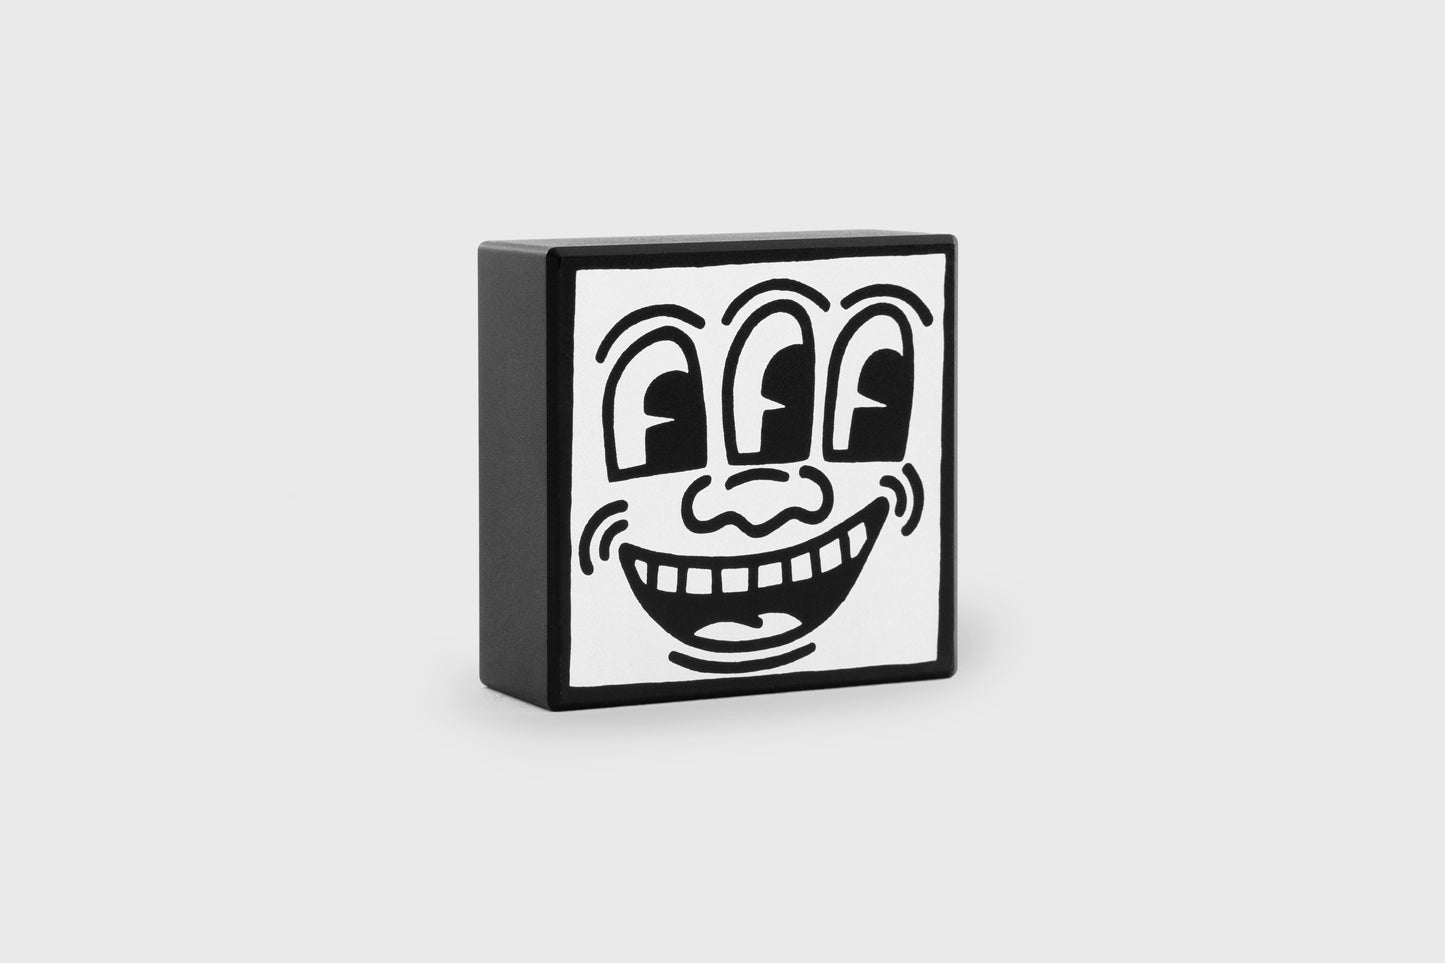 Record Weight (Keith Haring)